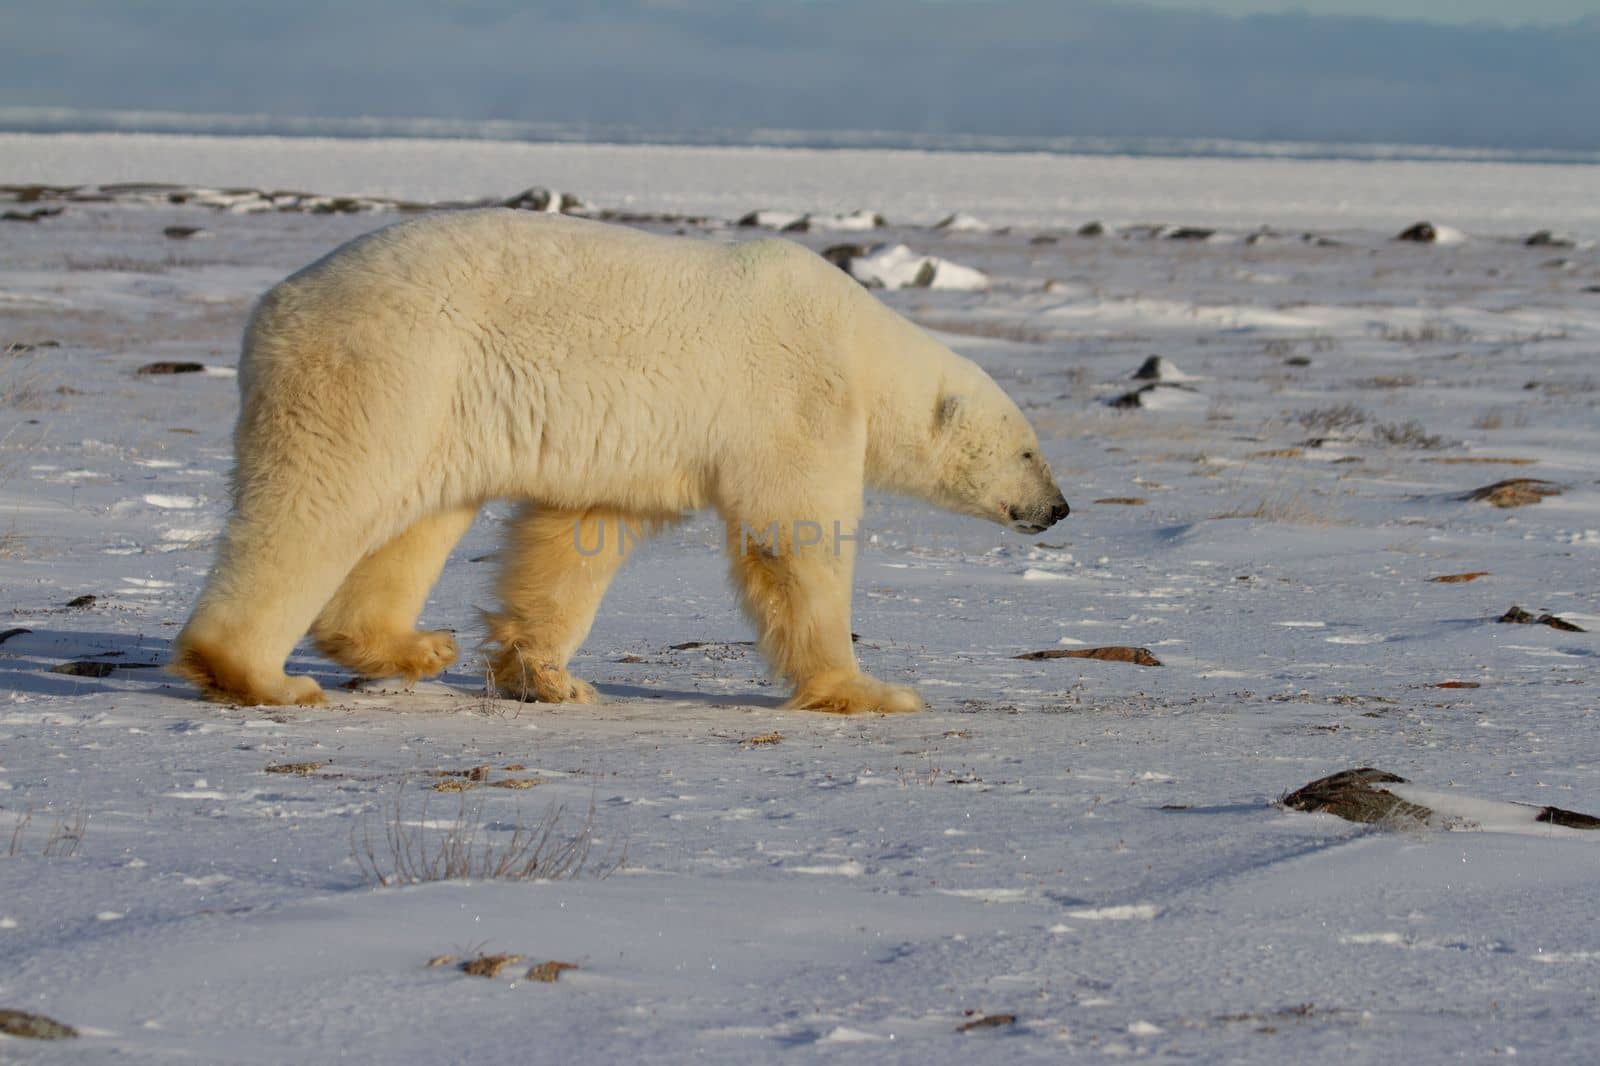 A polar bear, Ursus maritumis, walking on snow among rocks with ice in the background by Granchinho